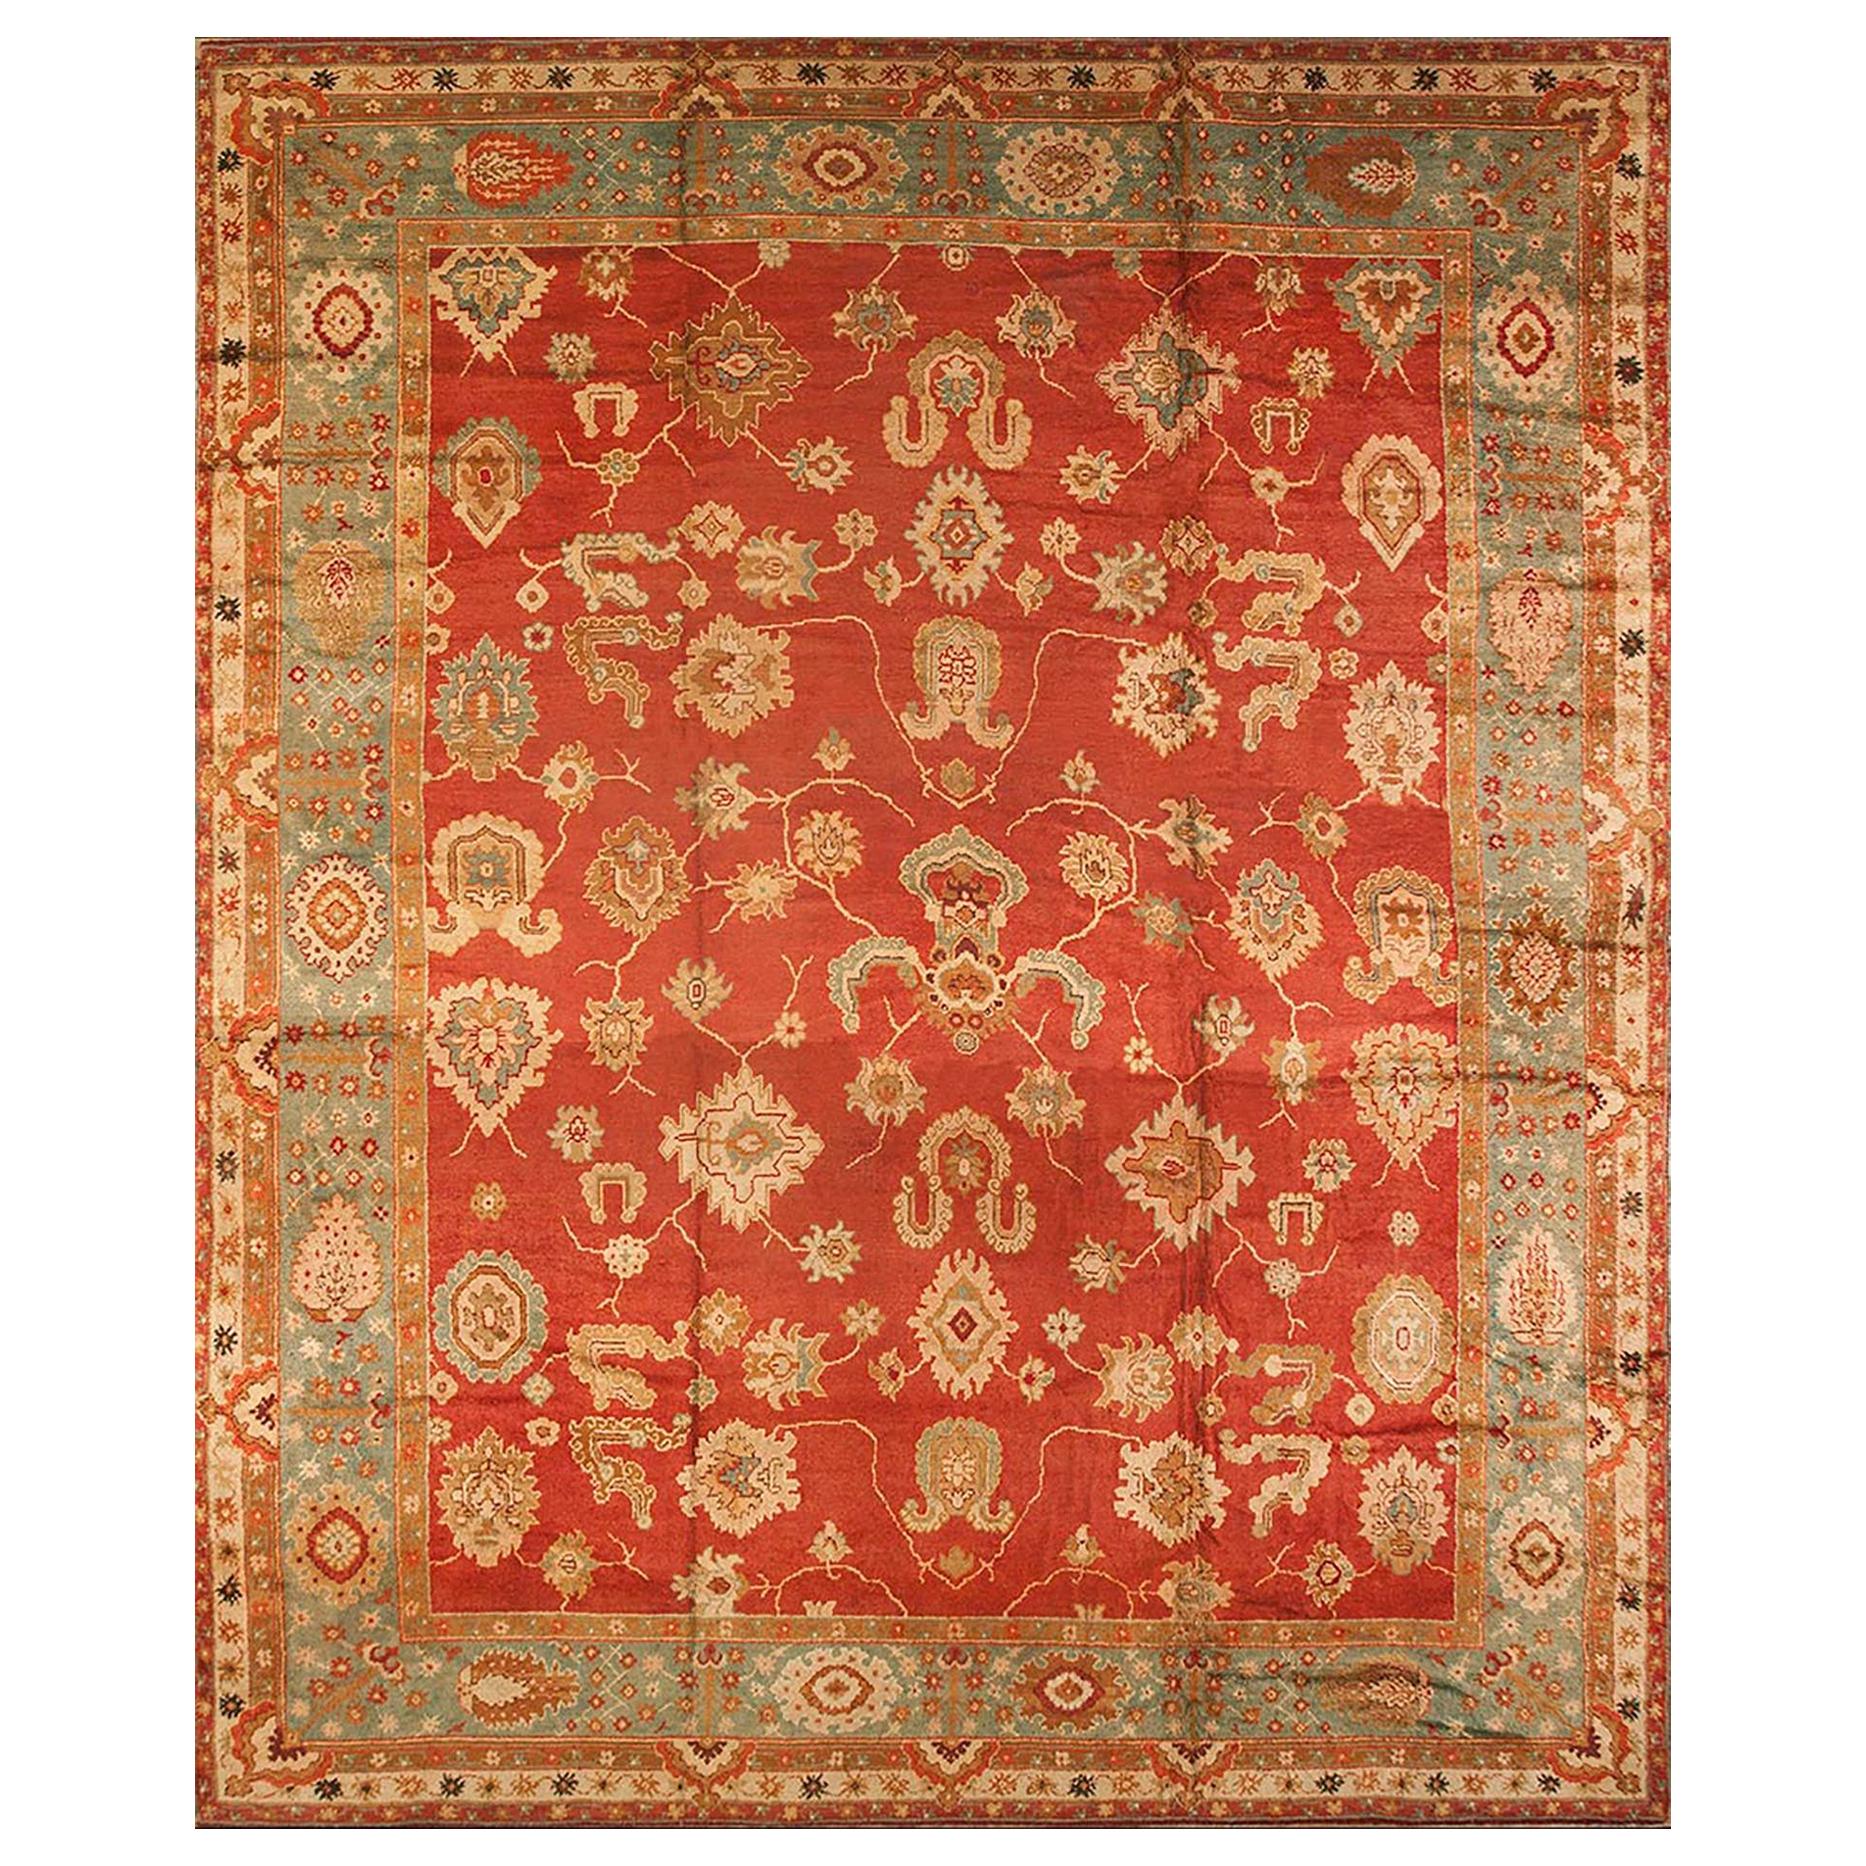 Early 20th Century Donegal Arts & Crafts Carpet ( 16'6" x 19'6" - 503 x 295 ) For Sale